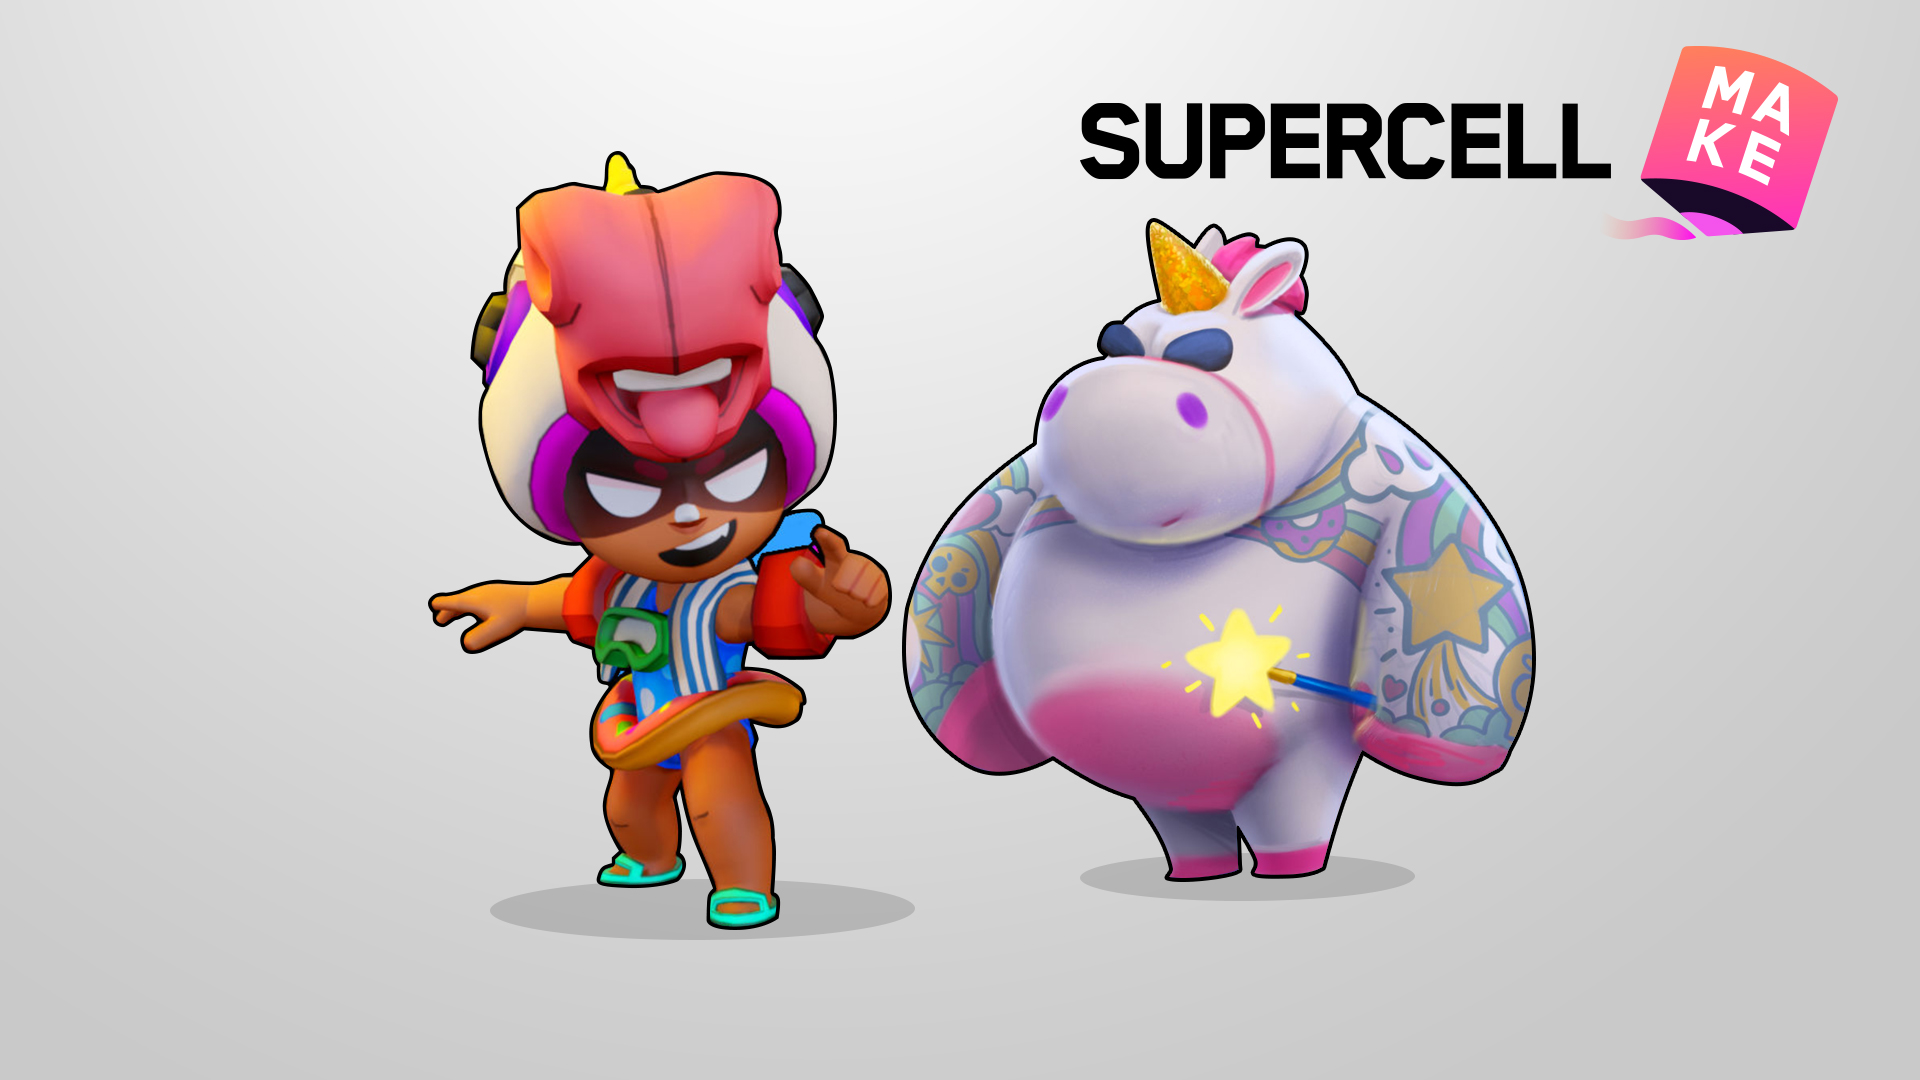 Brawl Stars On Twitter This Is The Last Chance For You To Vote On Your Favorite Nita Skins Which One Would You Like To See In The Game Go To Https T Co Youh15hbk8 - personagens brawl stars nita 2021